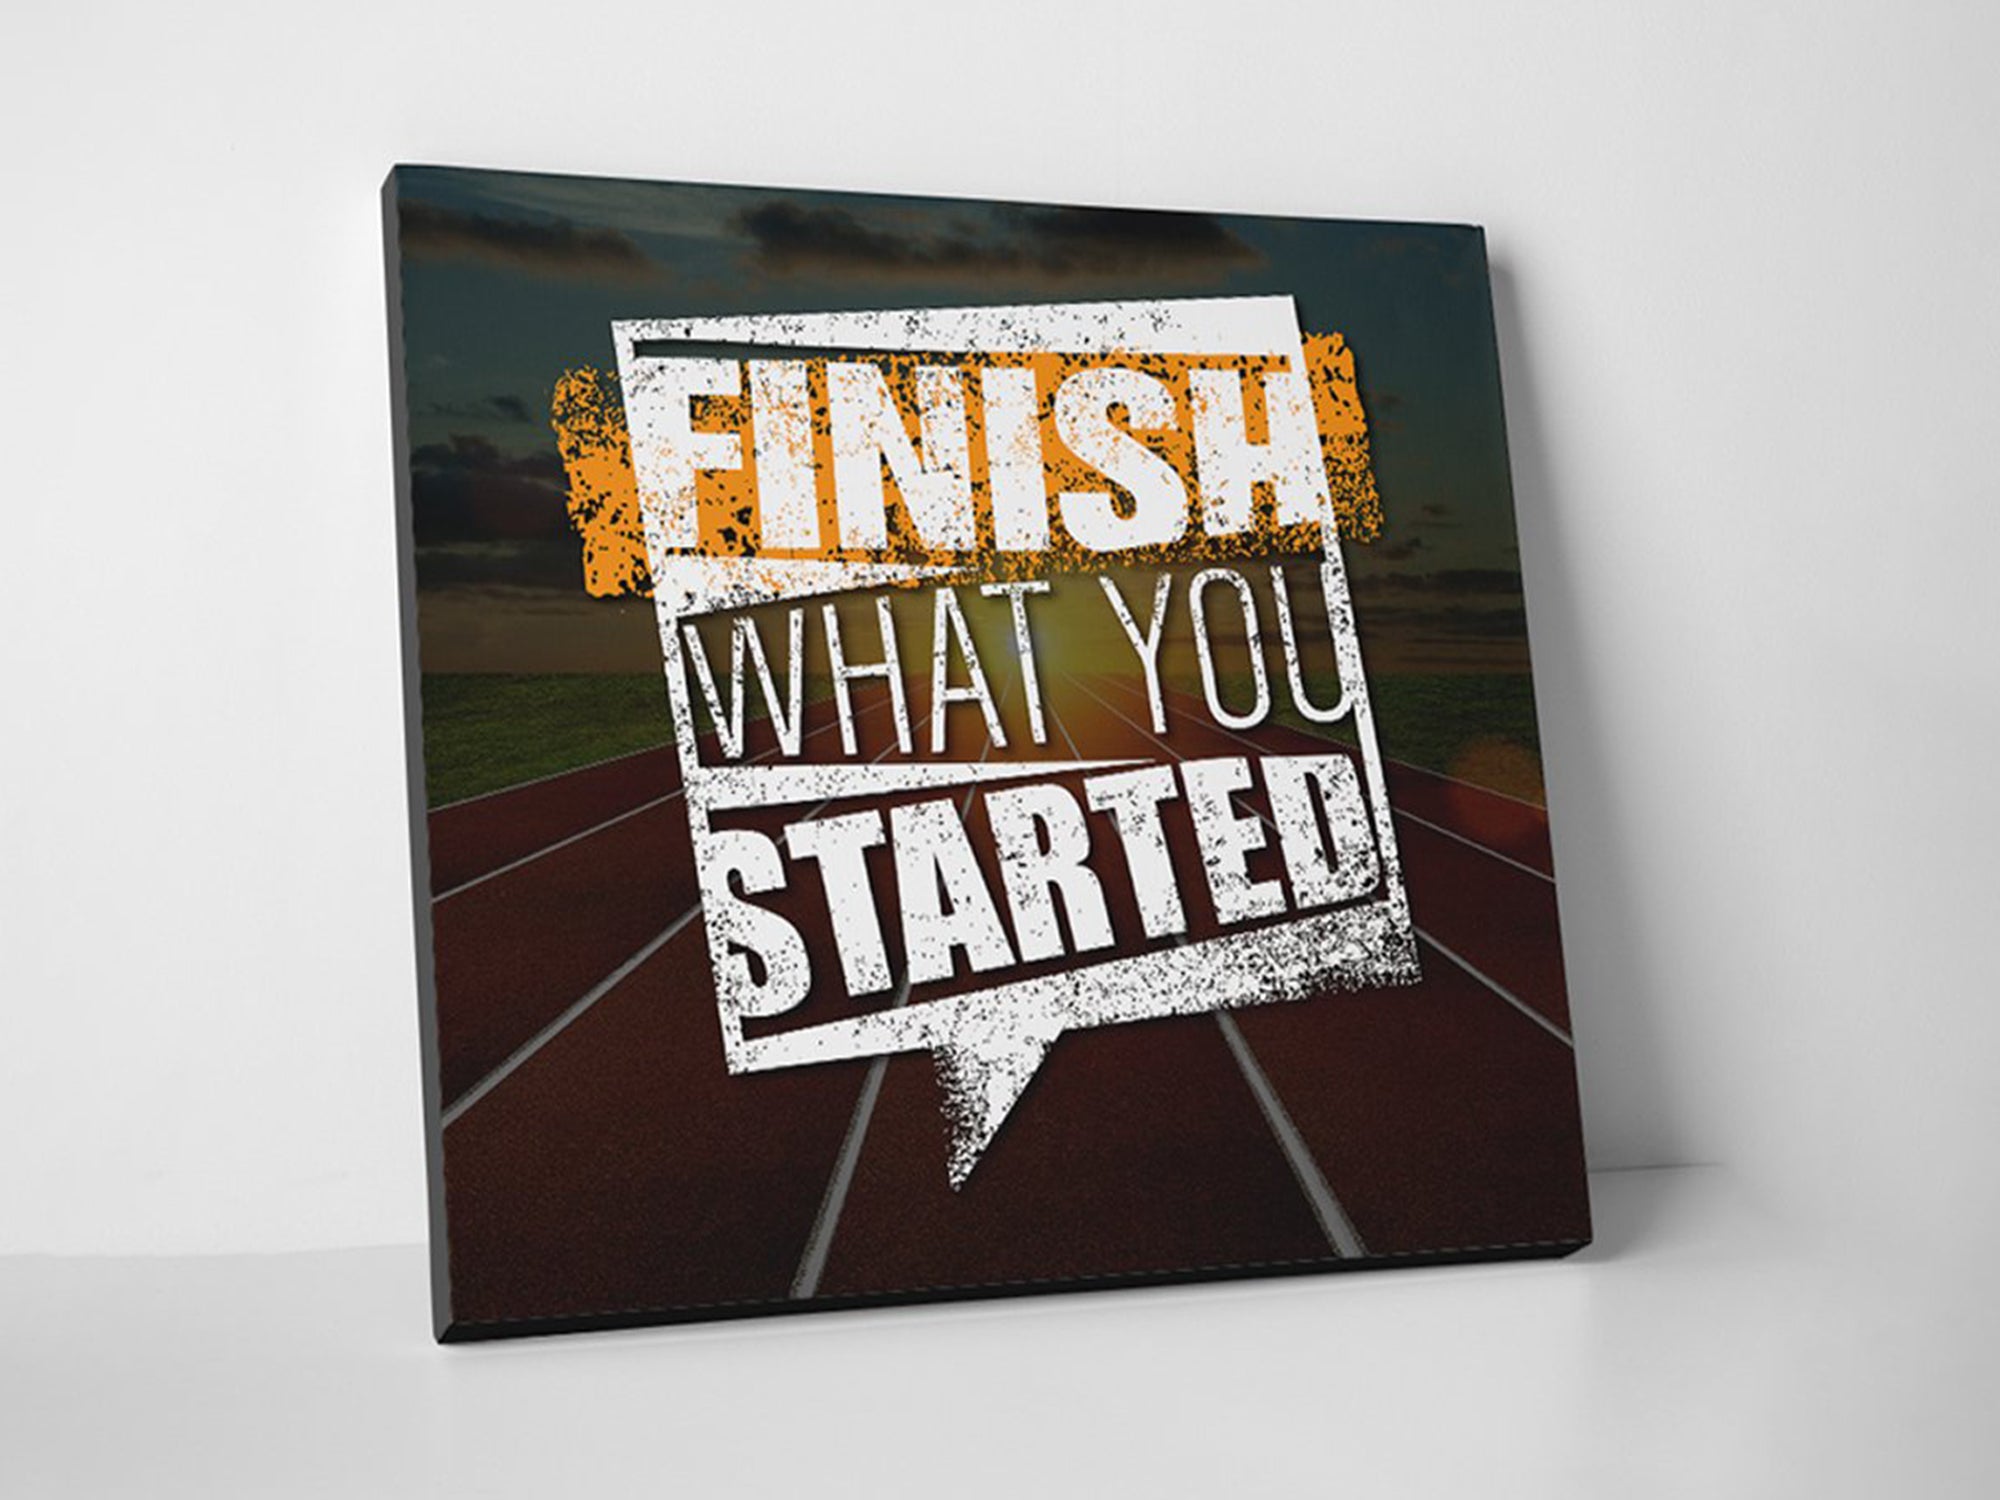 Finish What You Started Canvas Wall Art